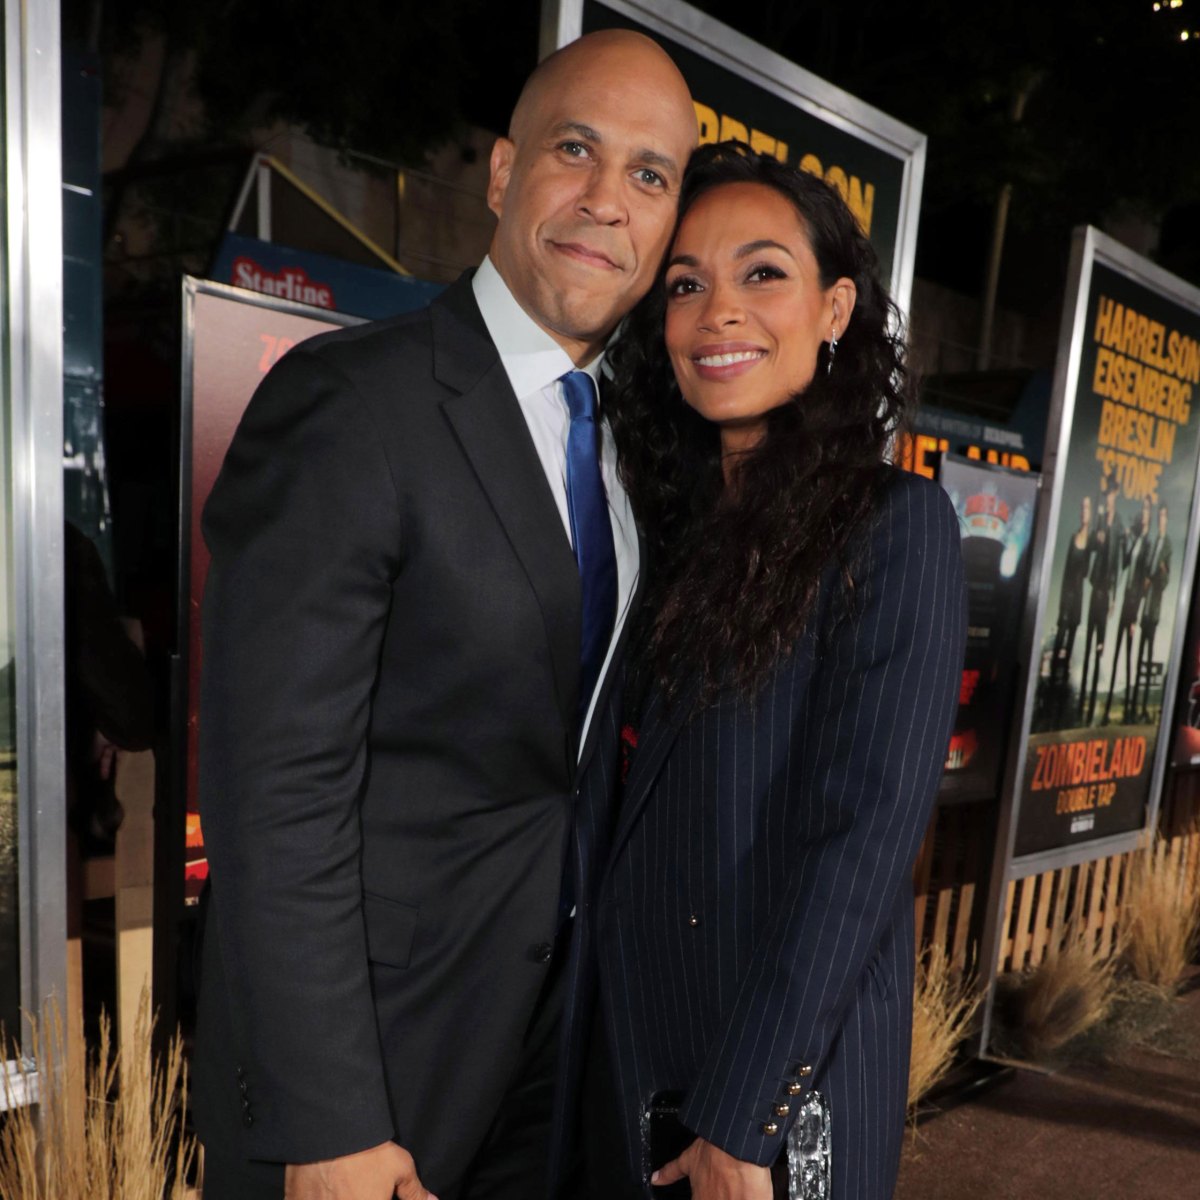 osario Dawson Says Cory Booker Sends Her 'Romantic' Poems, Songs